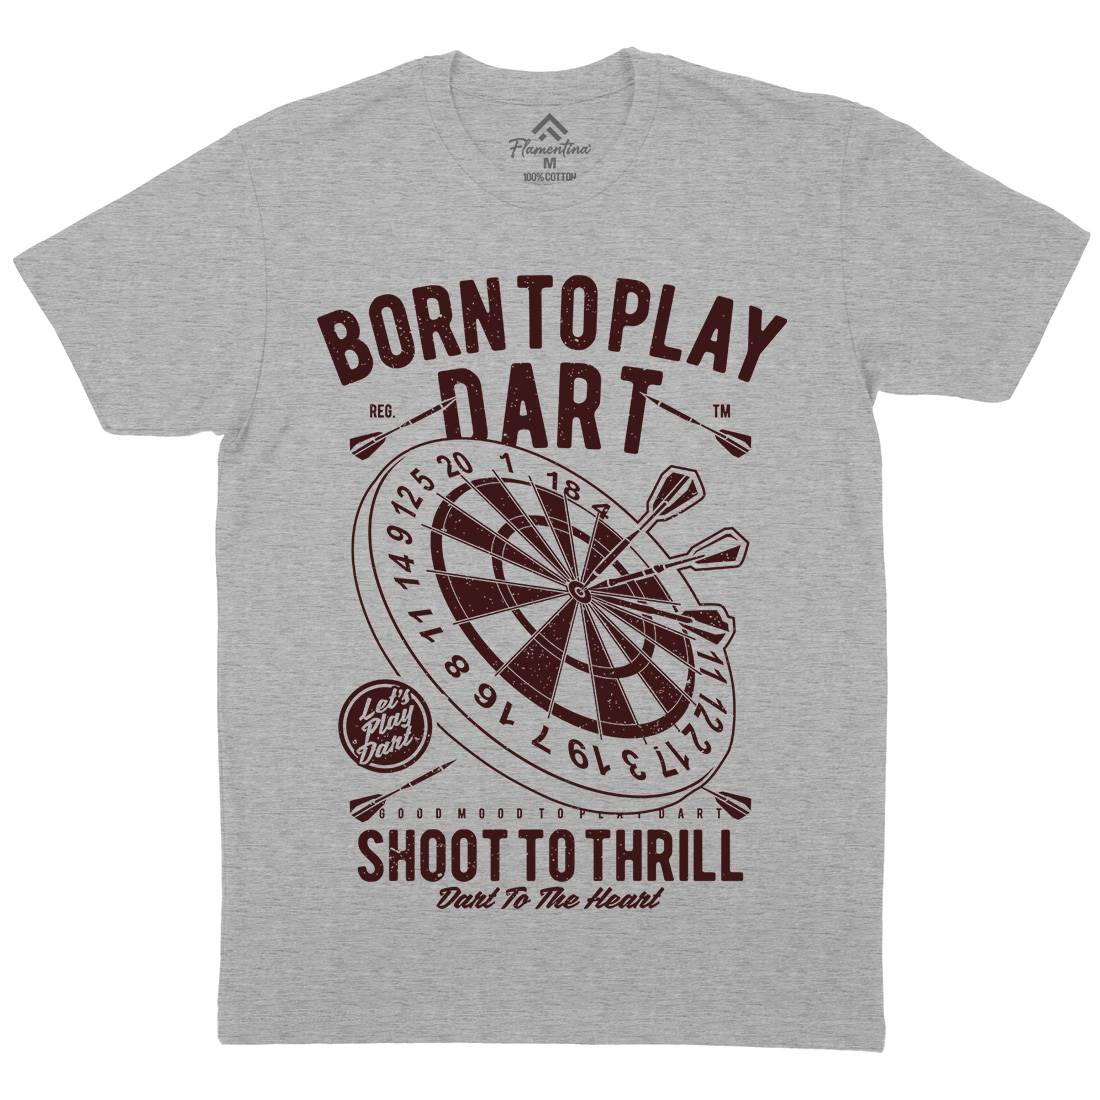 Born To Play Mens Crew Neck T-Shirt Sport A622